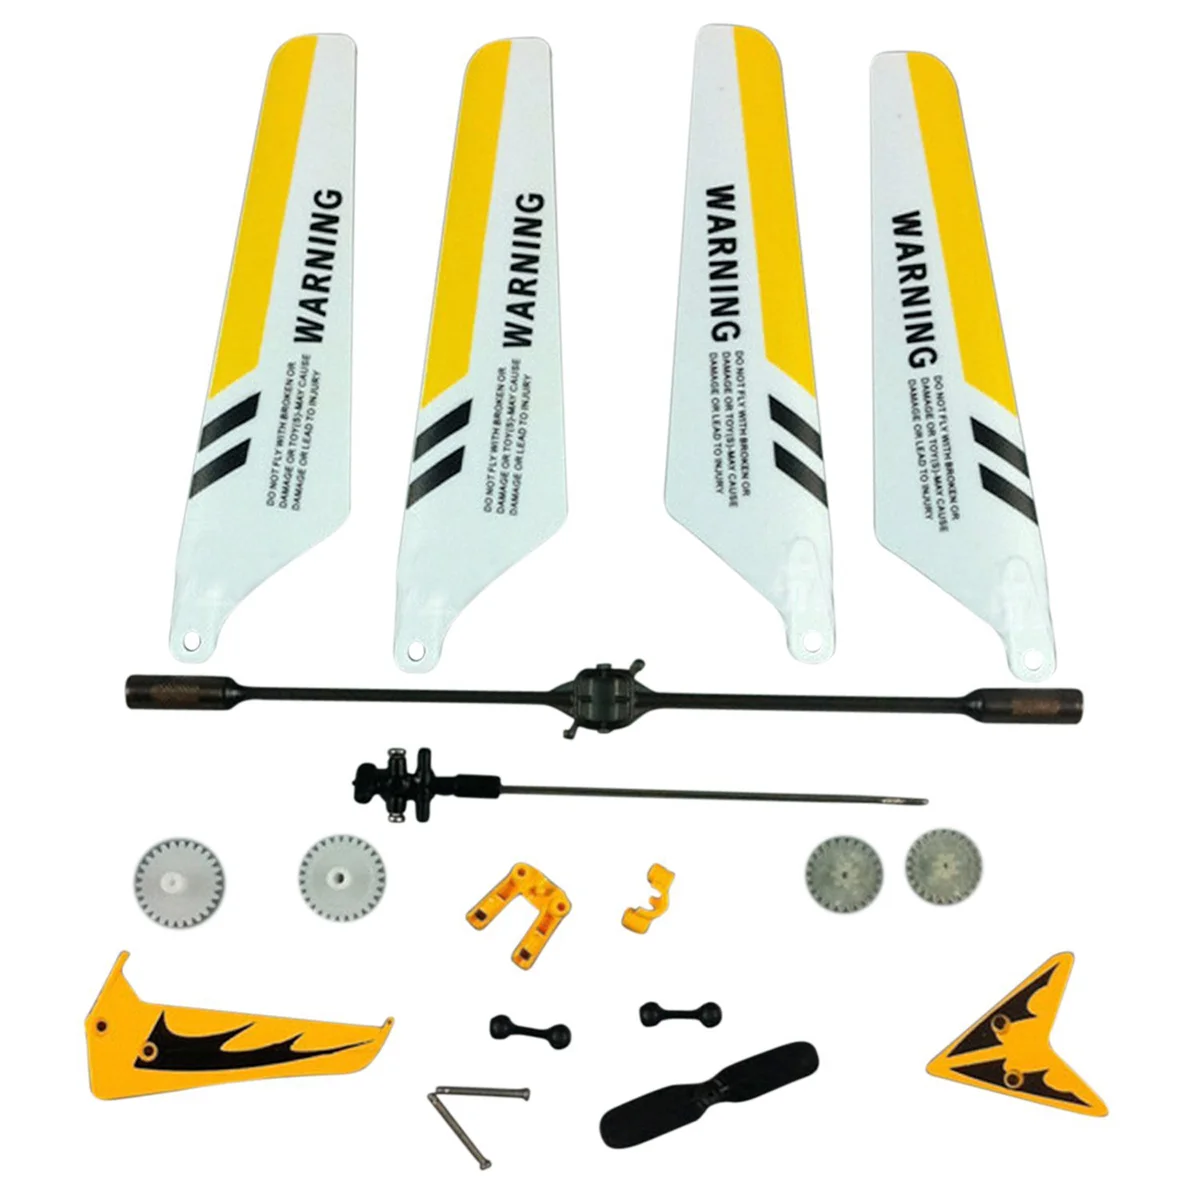  Spare Replacement S107G Rc Set Tail Helicopter Full S107 Main Decorations Props - $4.05